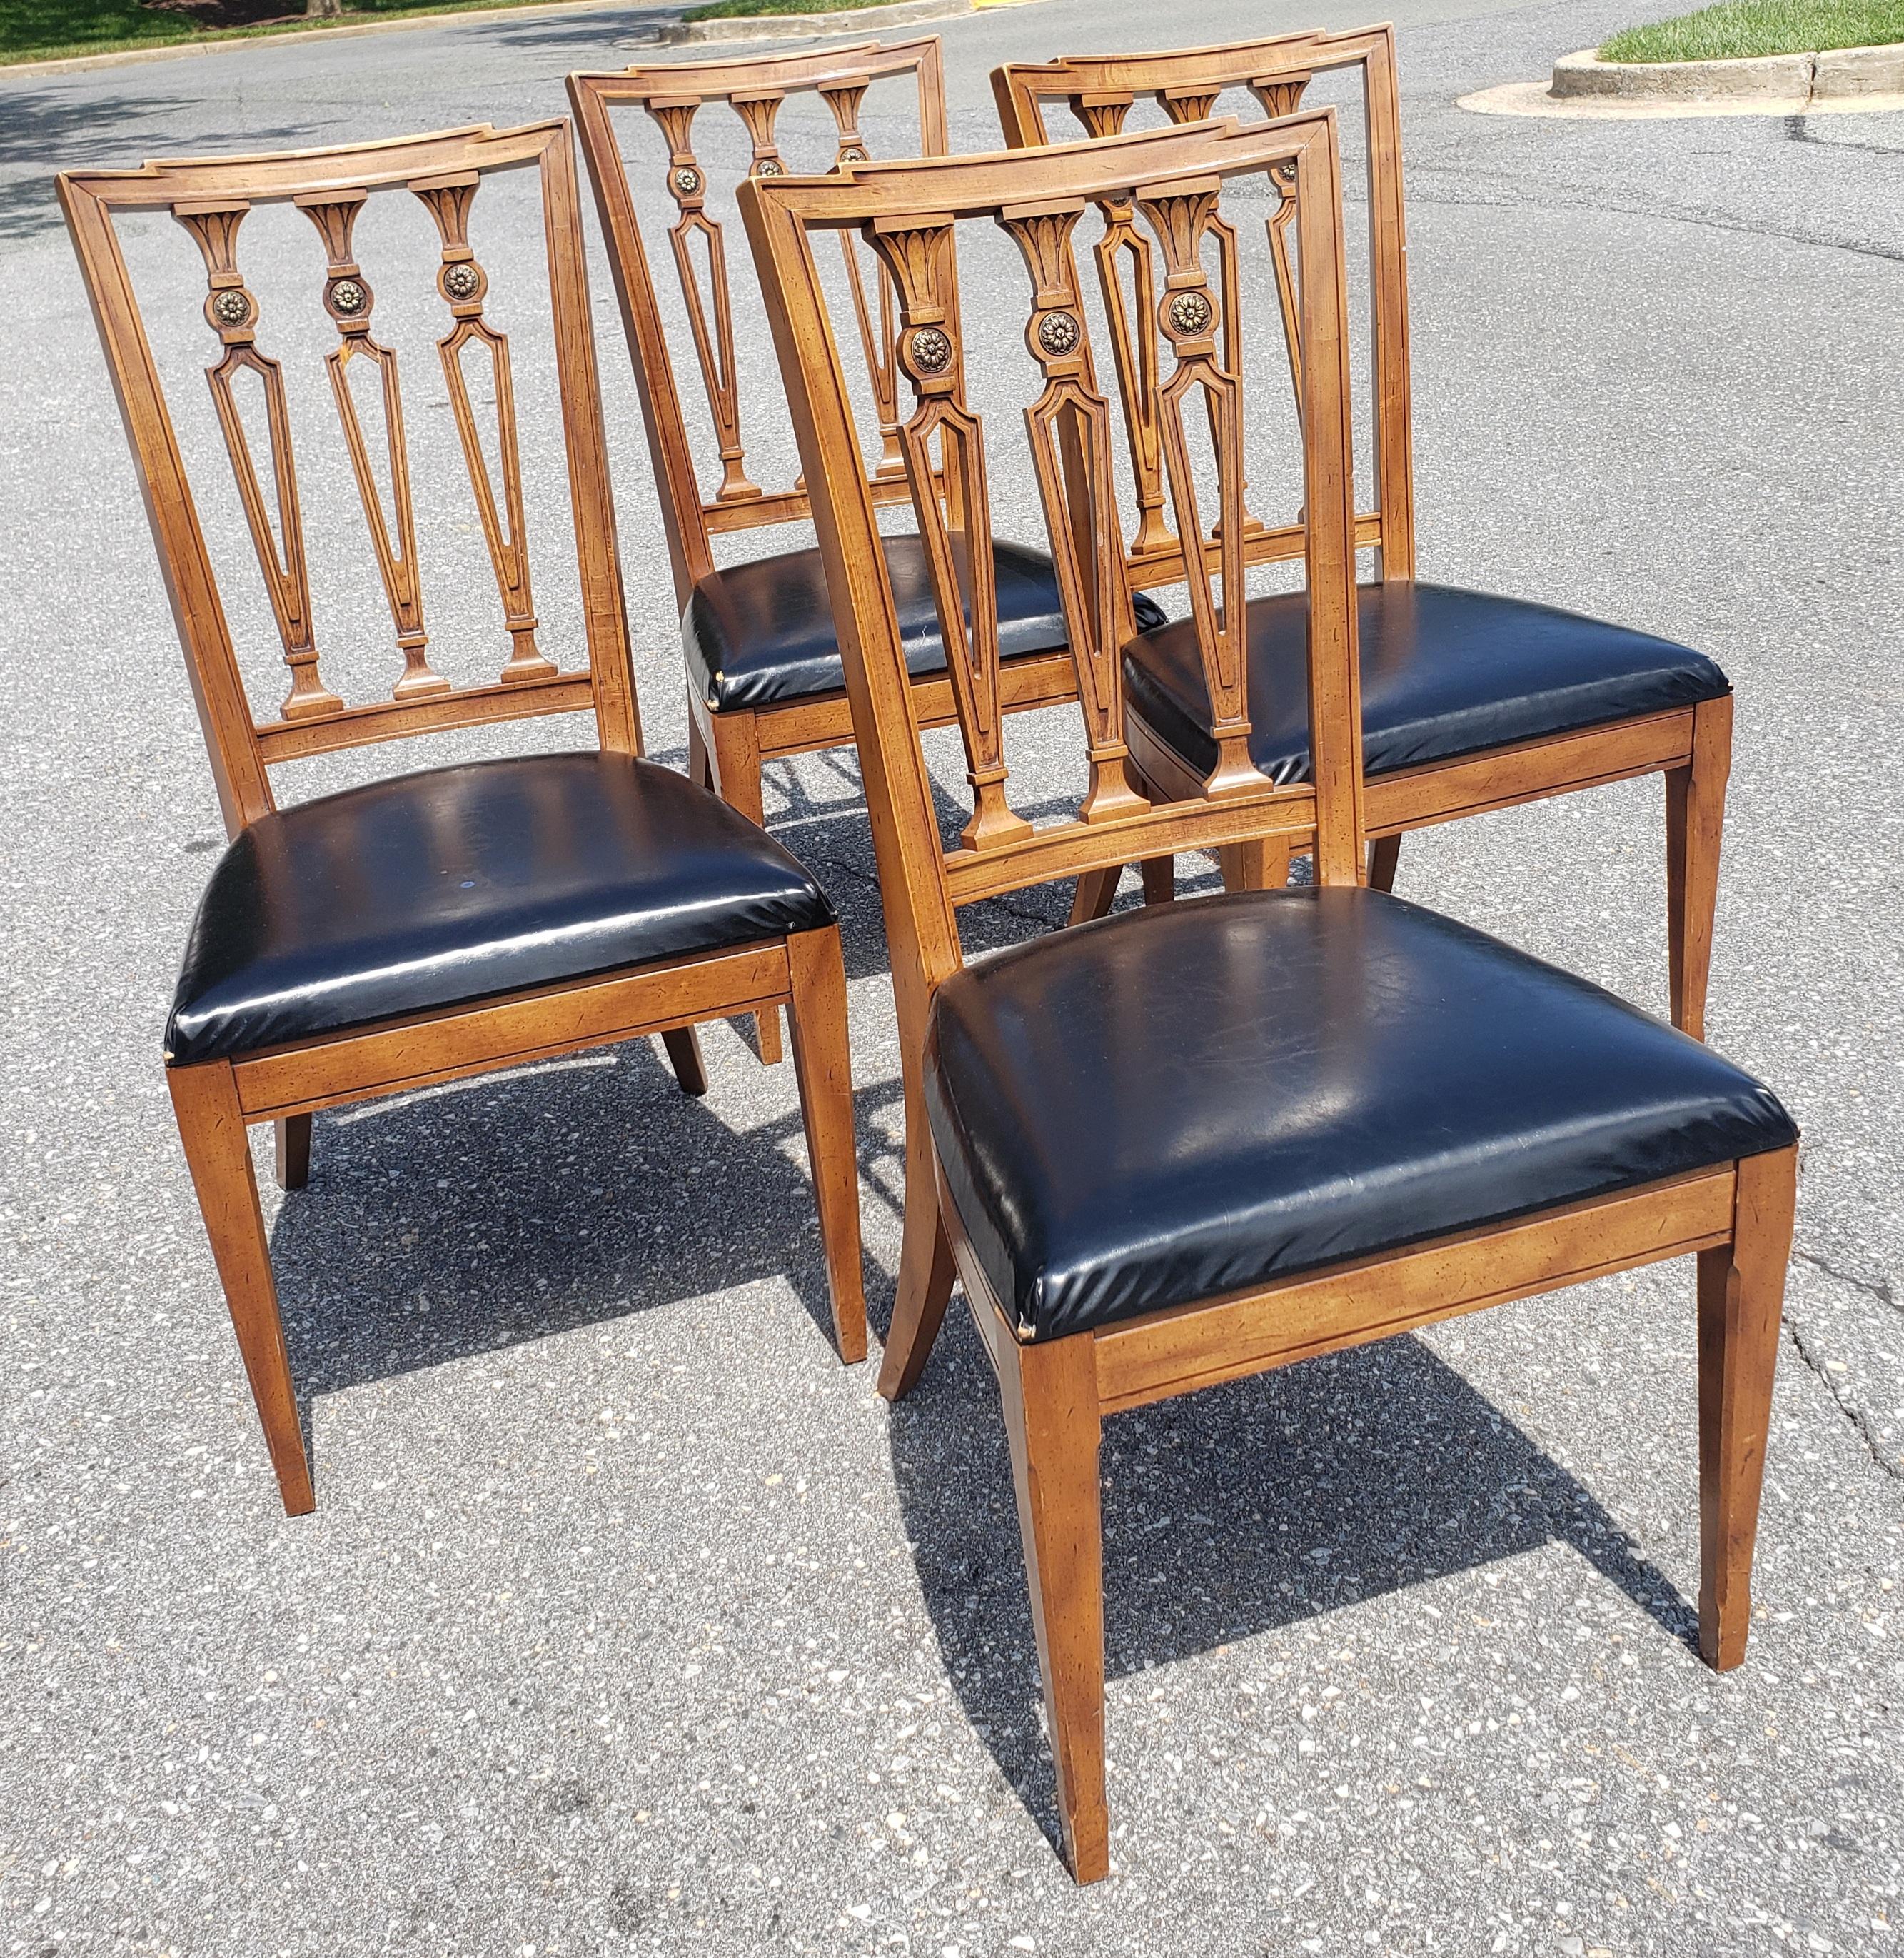 This set high quality Dining chairs is made out of French Walnut wood and cast brass mounted medaillion ornaments and brand new Black Upholstered Top Grain Cow Leather seats. The chairs were made by J. L. Metz. The have a light stain finish to the